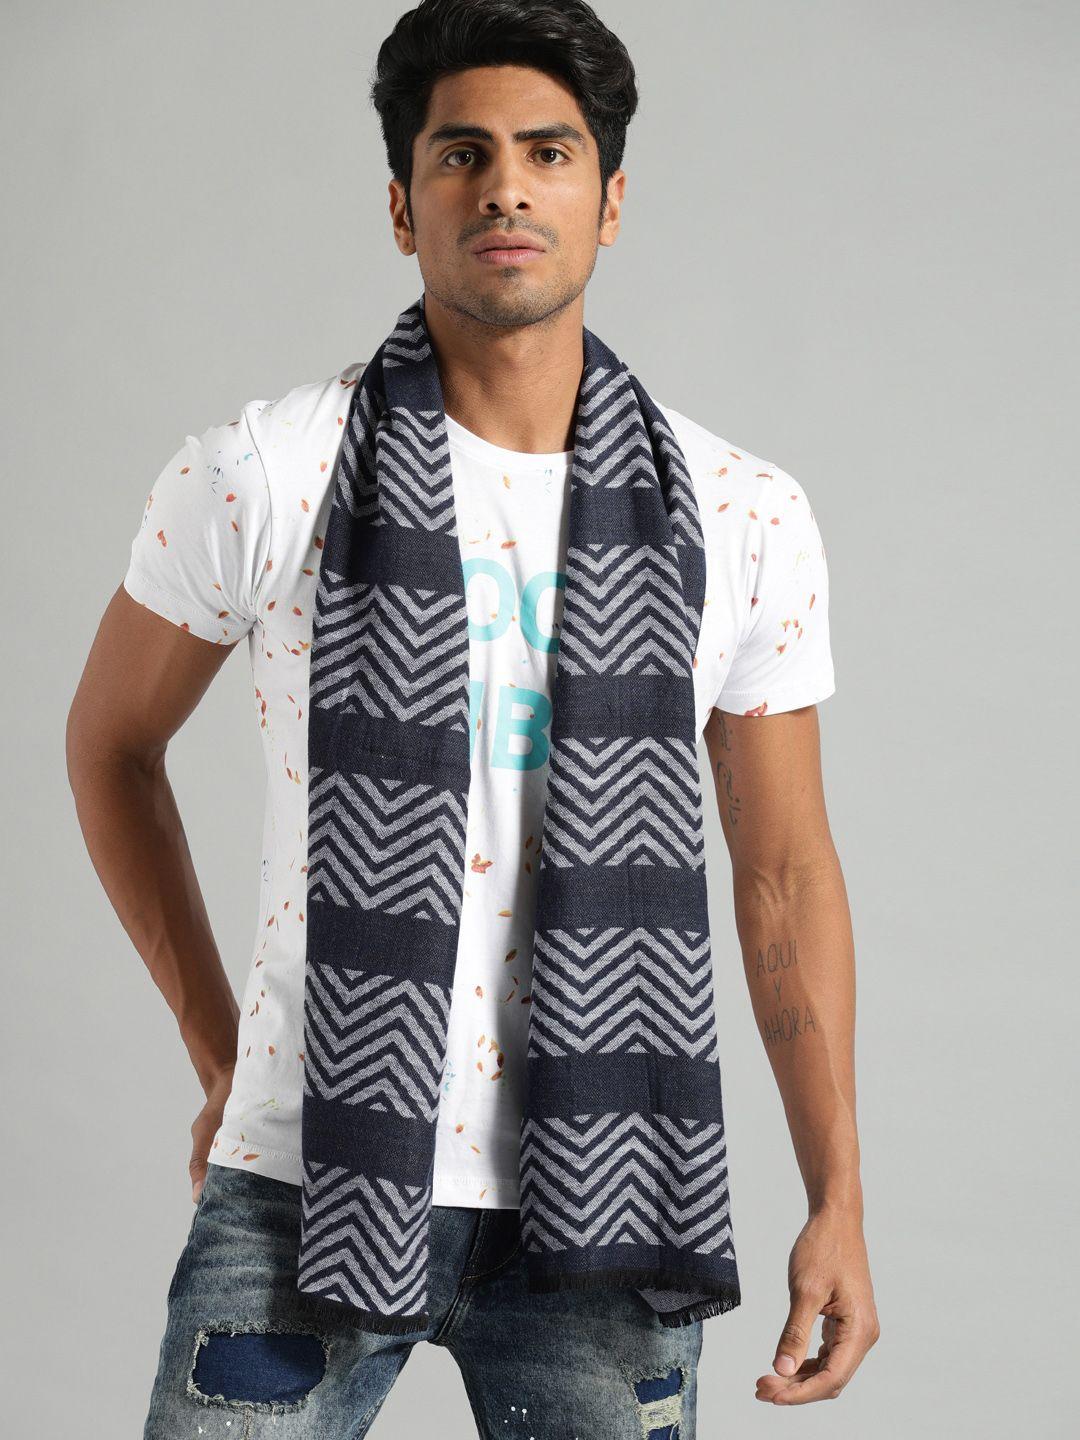 the roadster lifestyle co unisex navy blue & white striped acrylic scarf